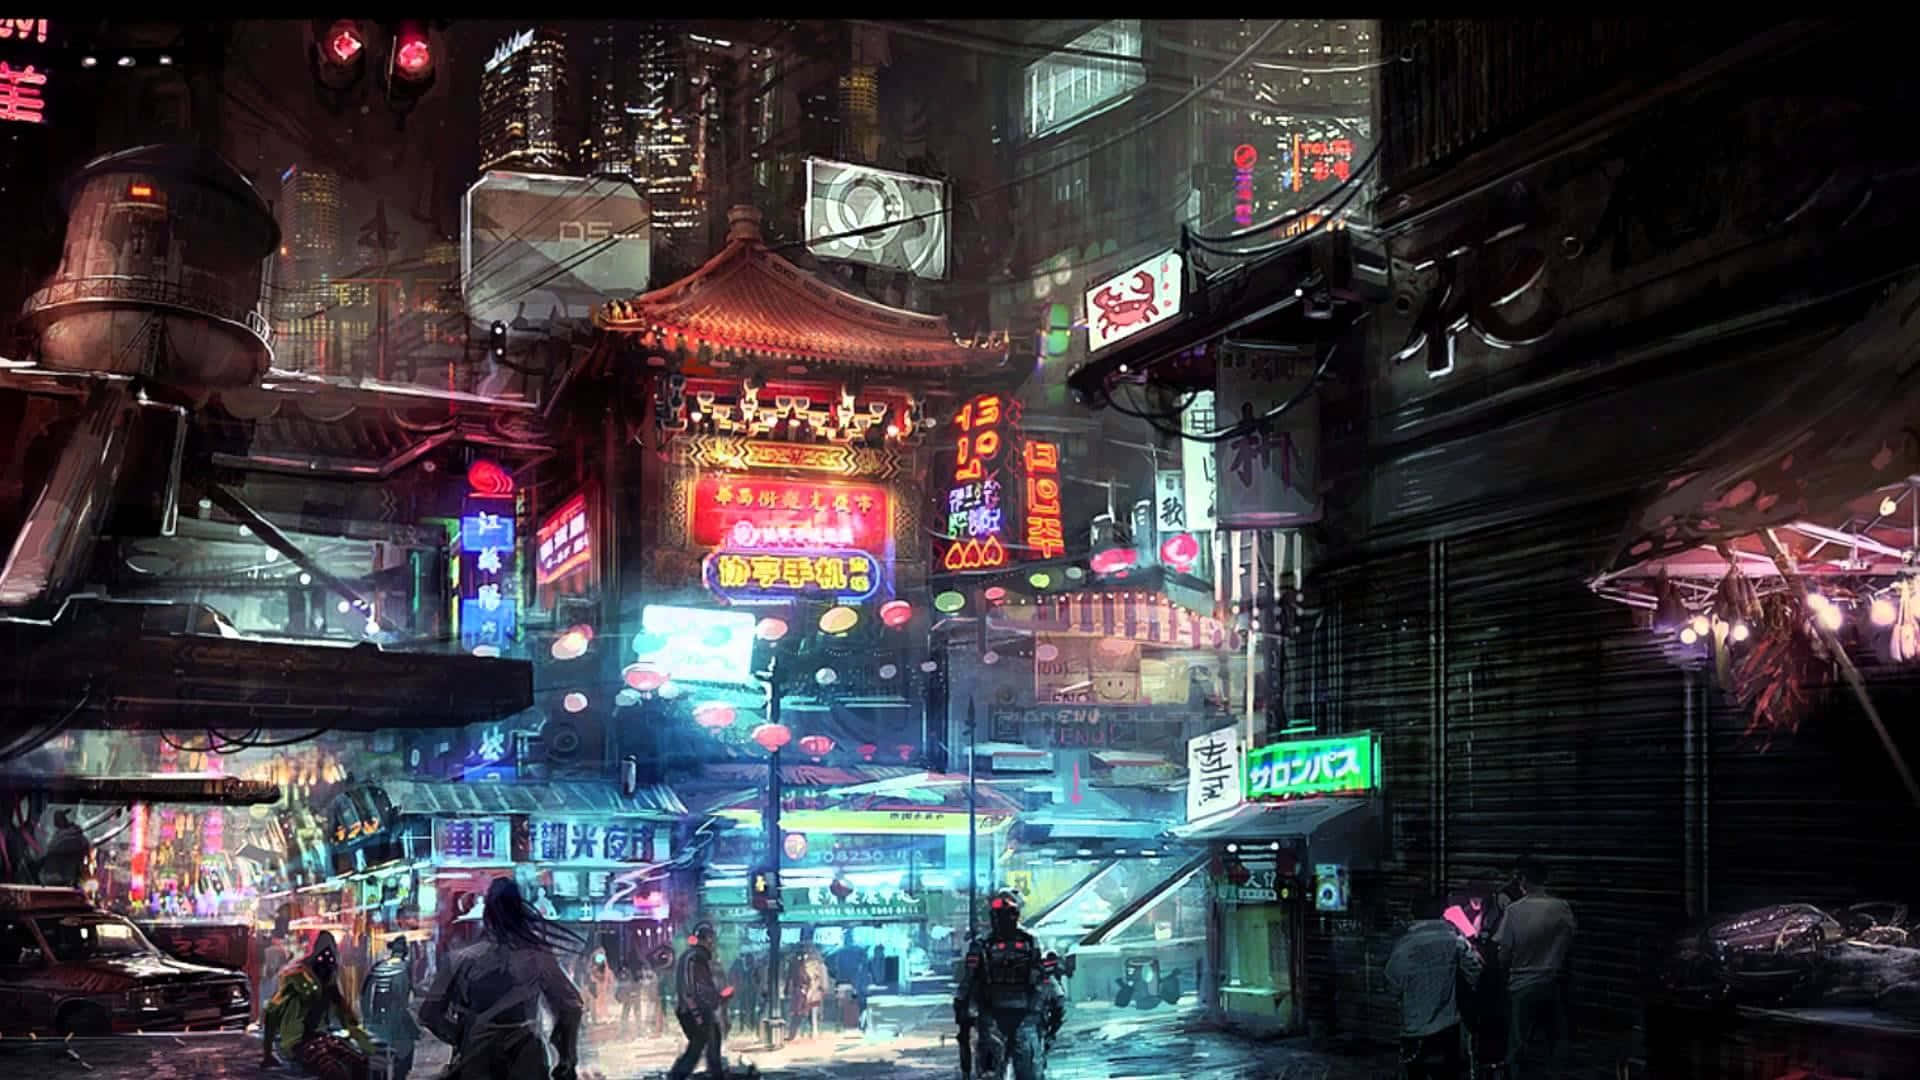 Stepping into the future - a vibrant Cyberpunk City